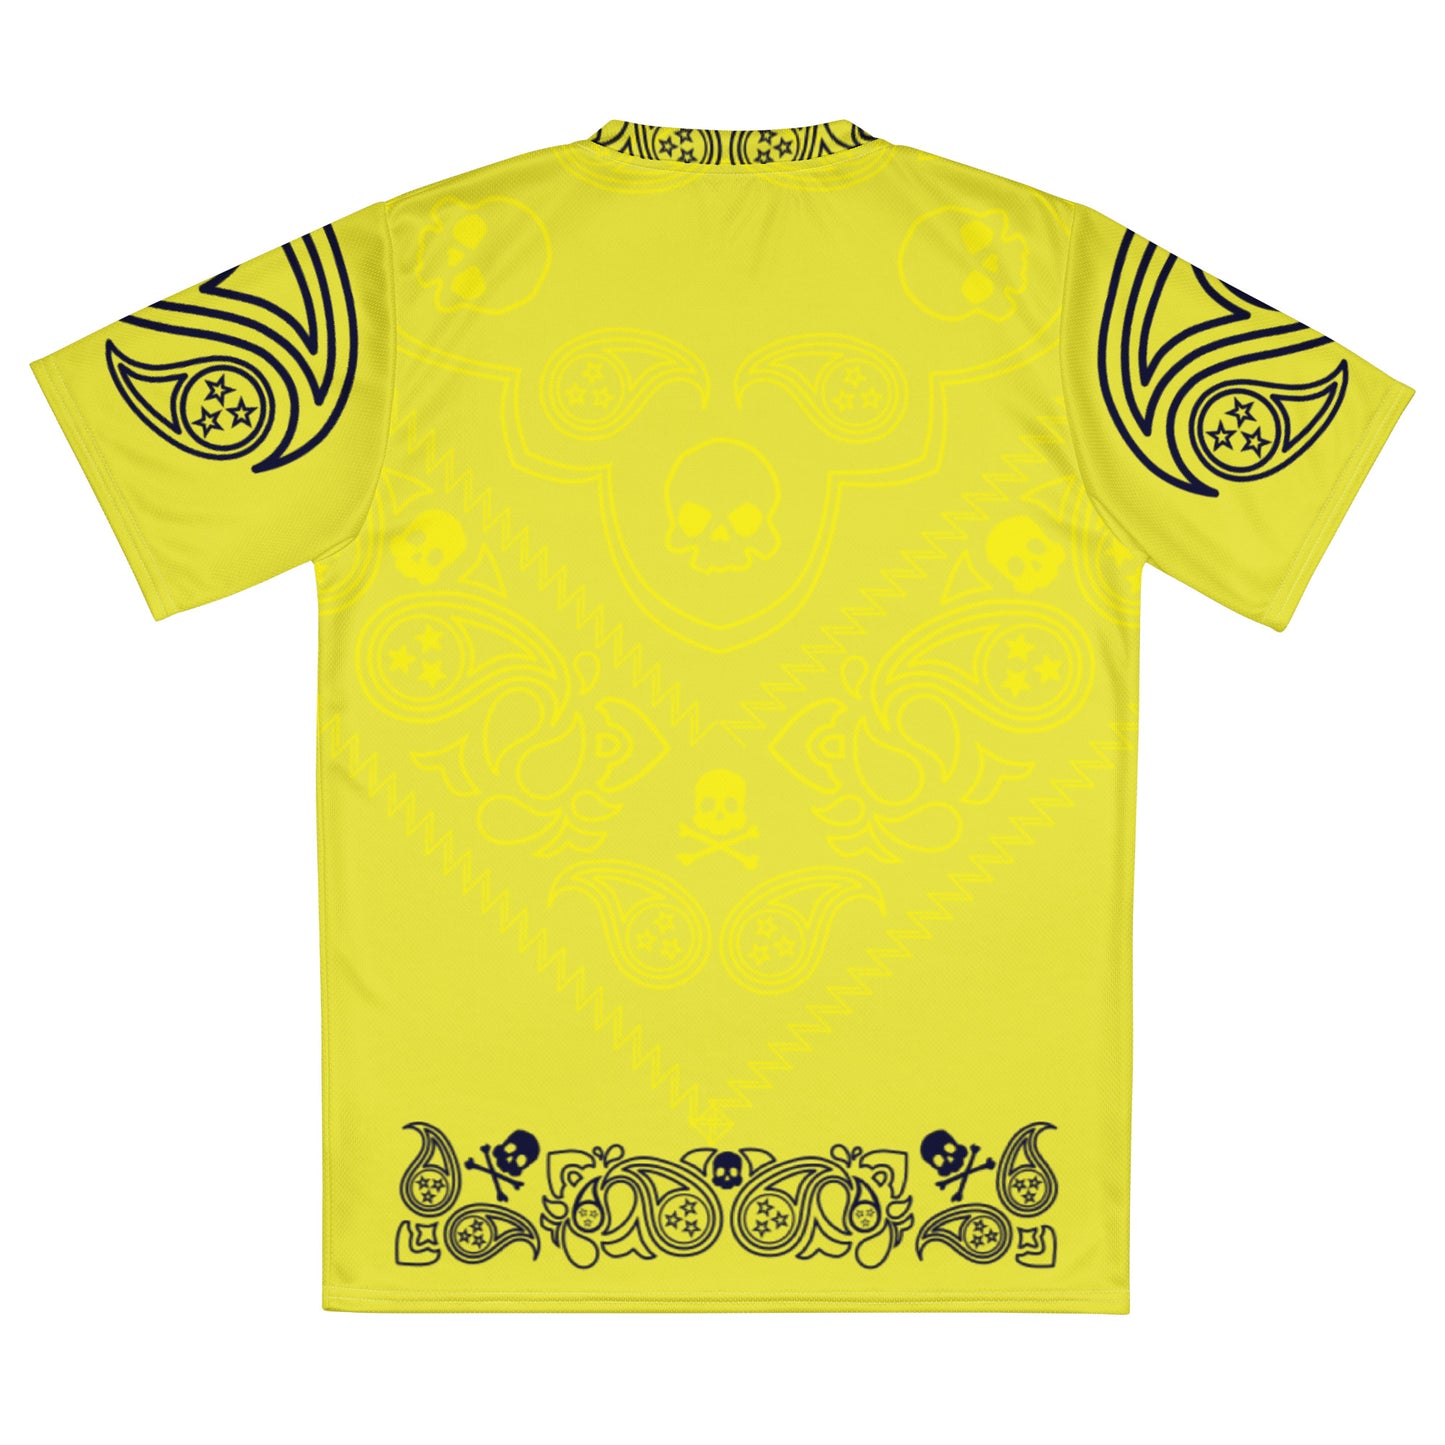 Skull Paisley Recycled unisex sports jersey